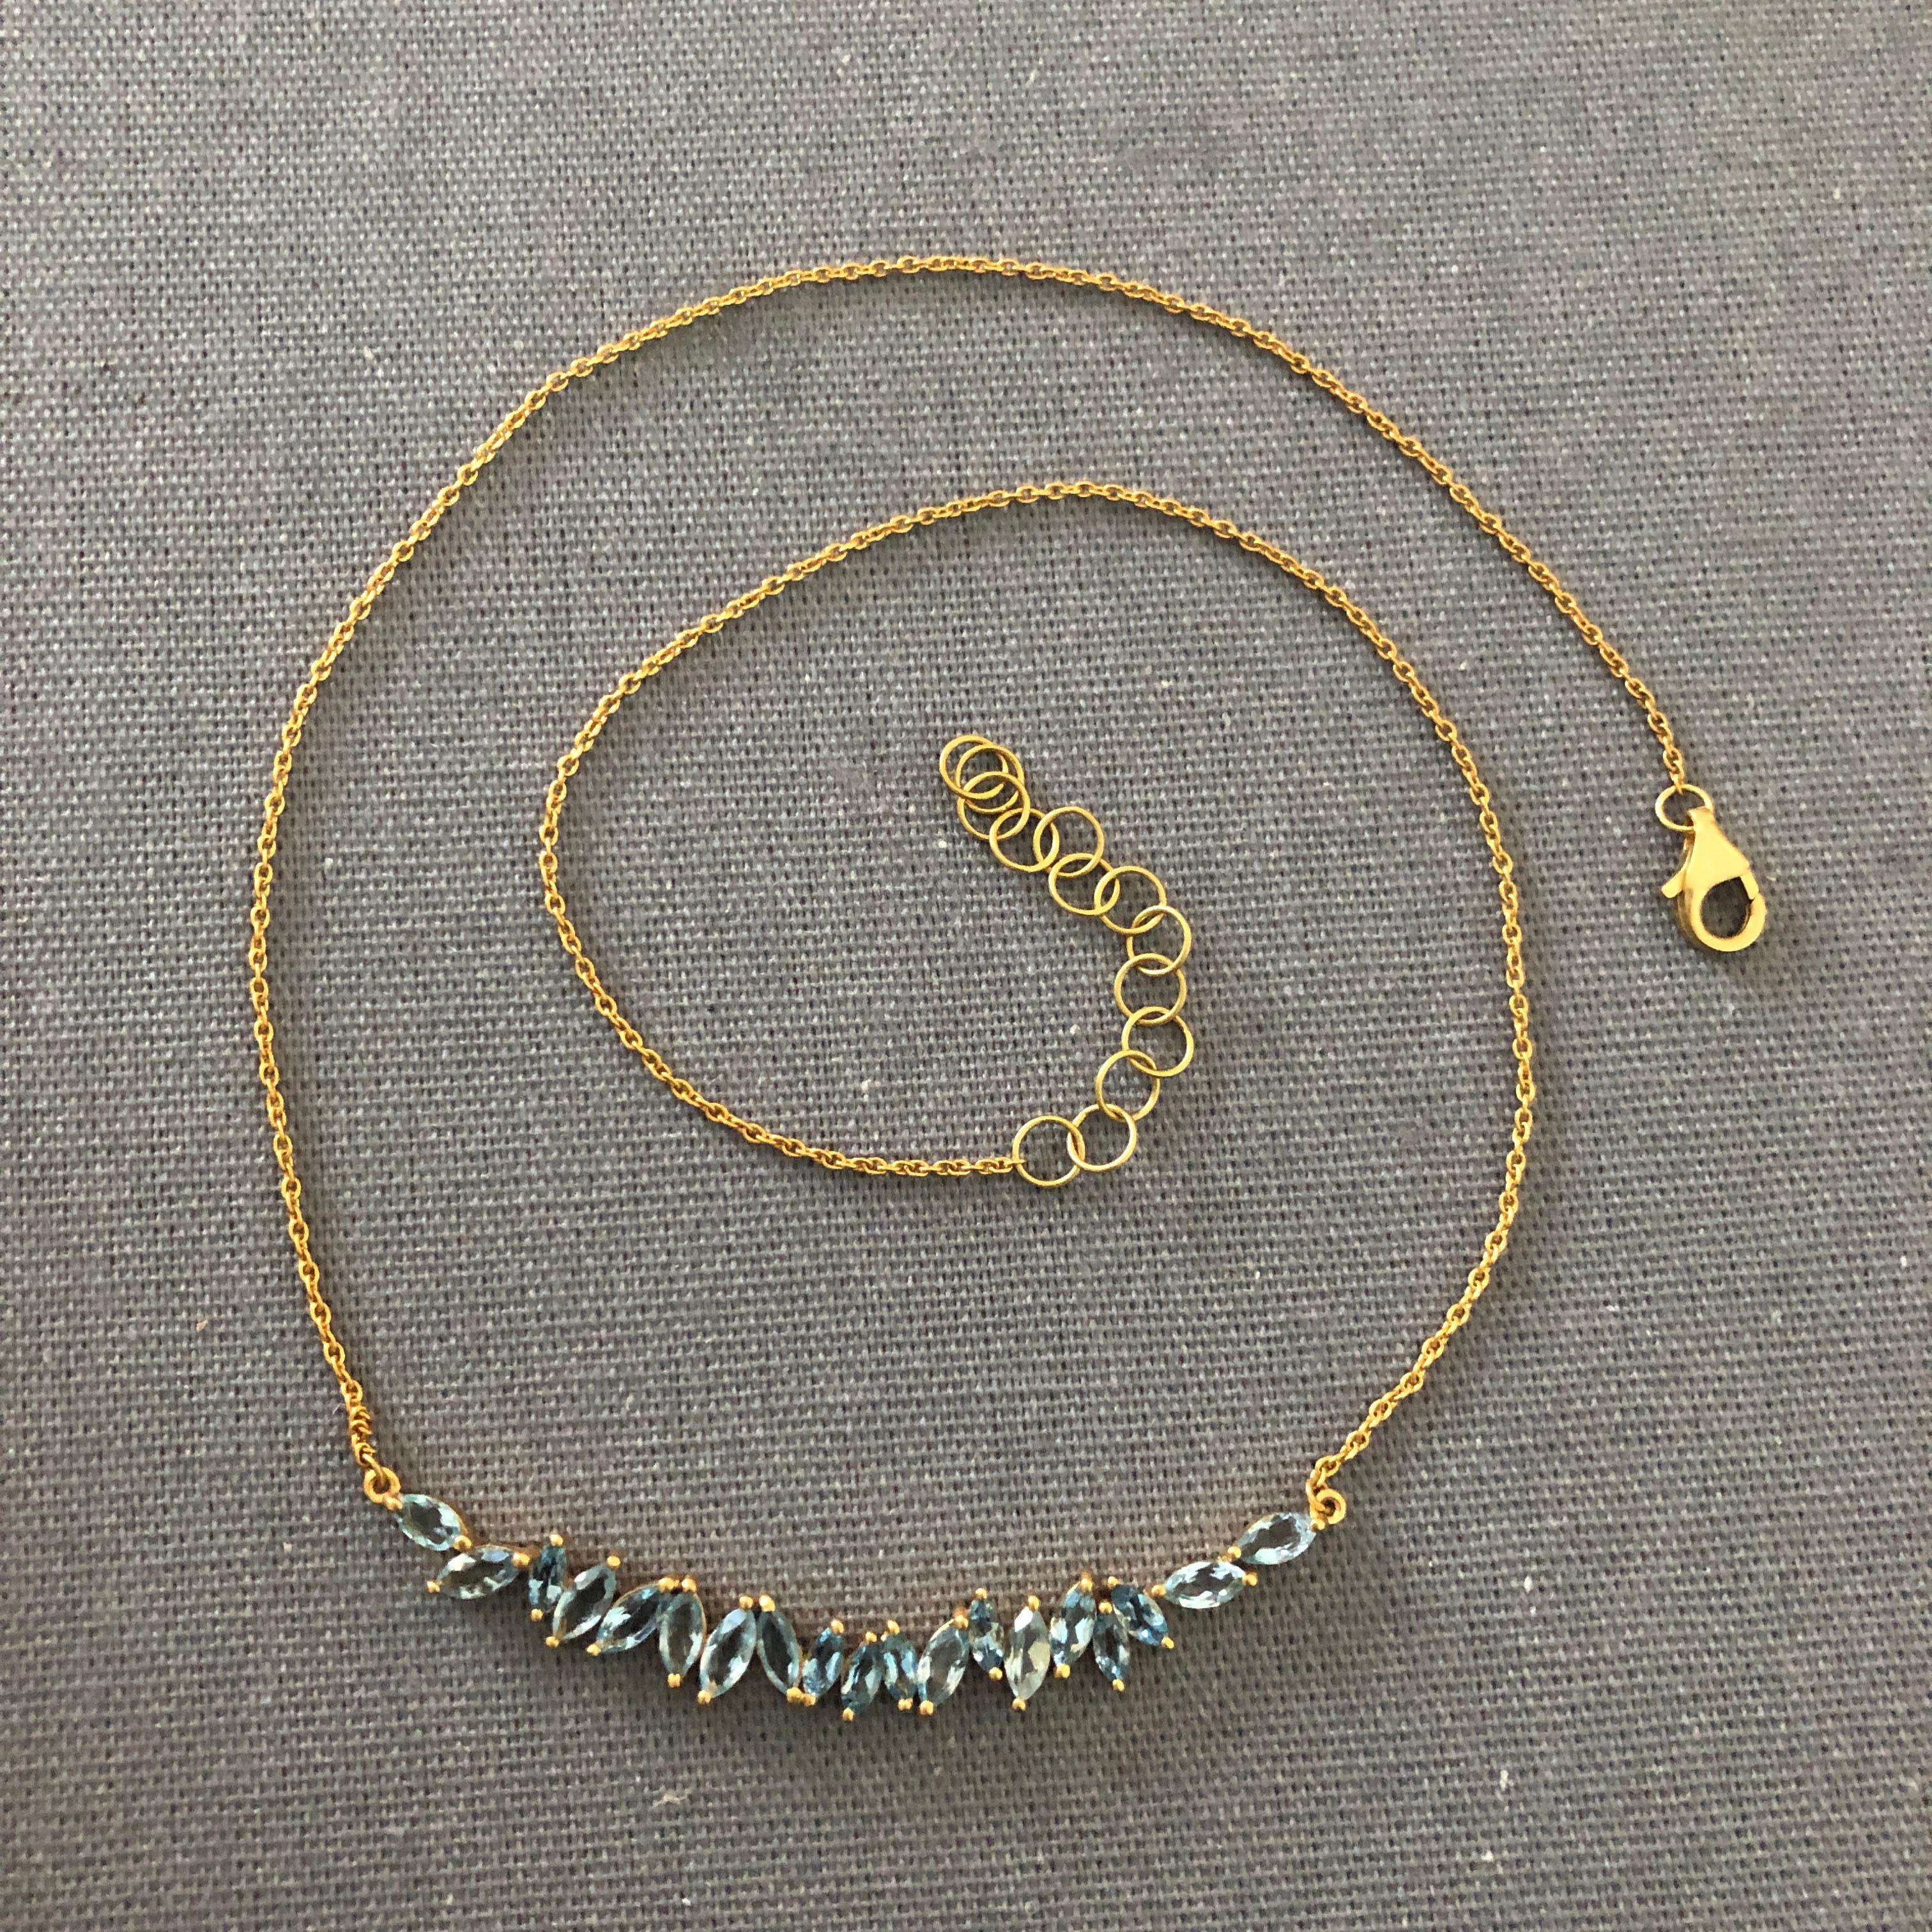 2.29 Carat Aquamarine Gold Bar Necklace by Lauren Harper In New Condition For Sale In Winnetka, IL